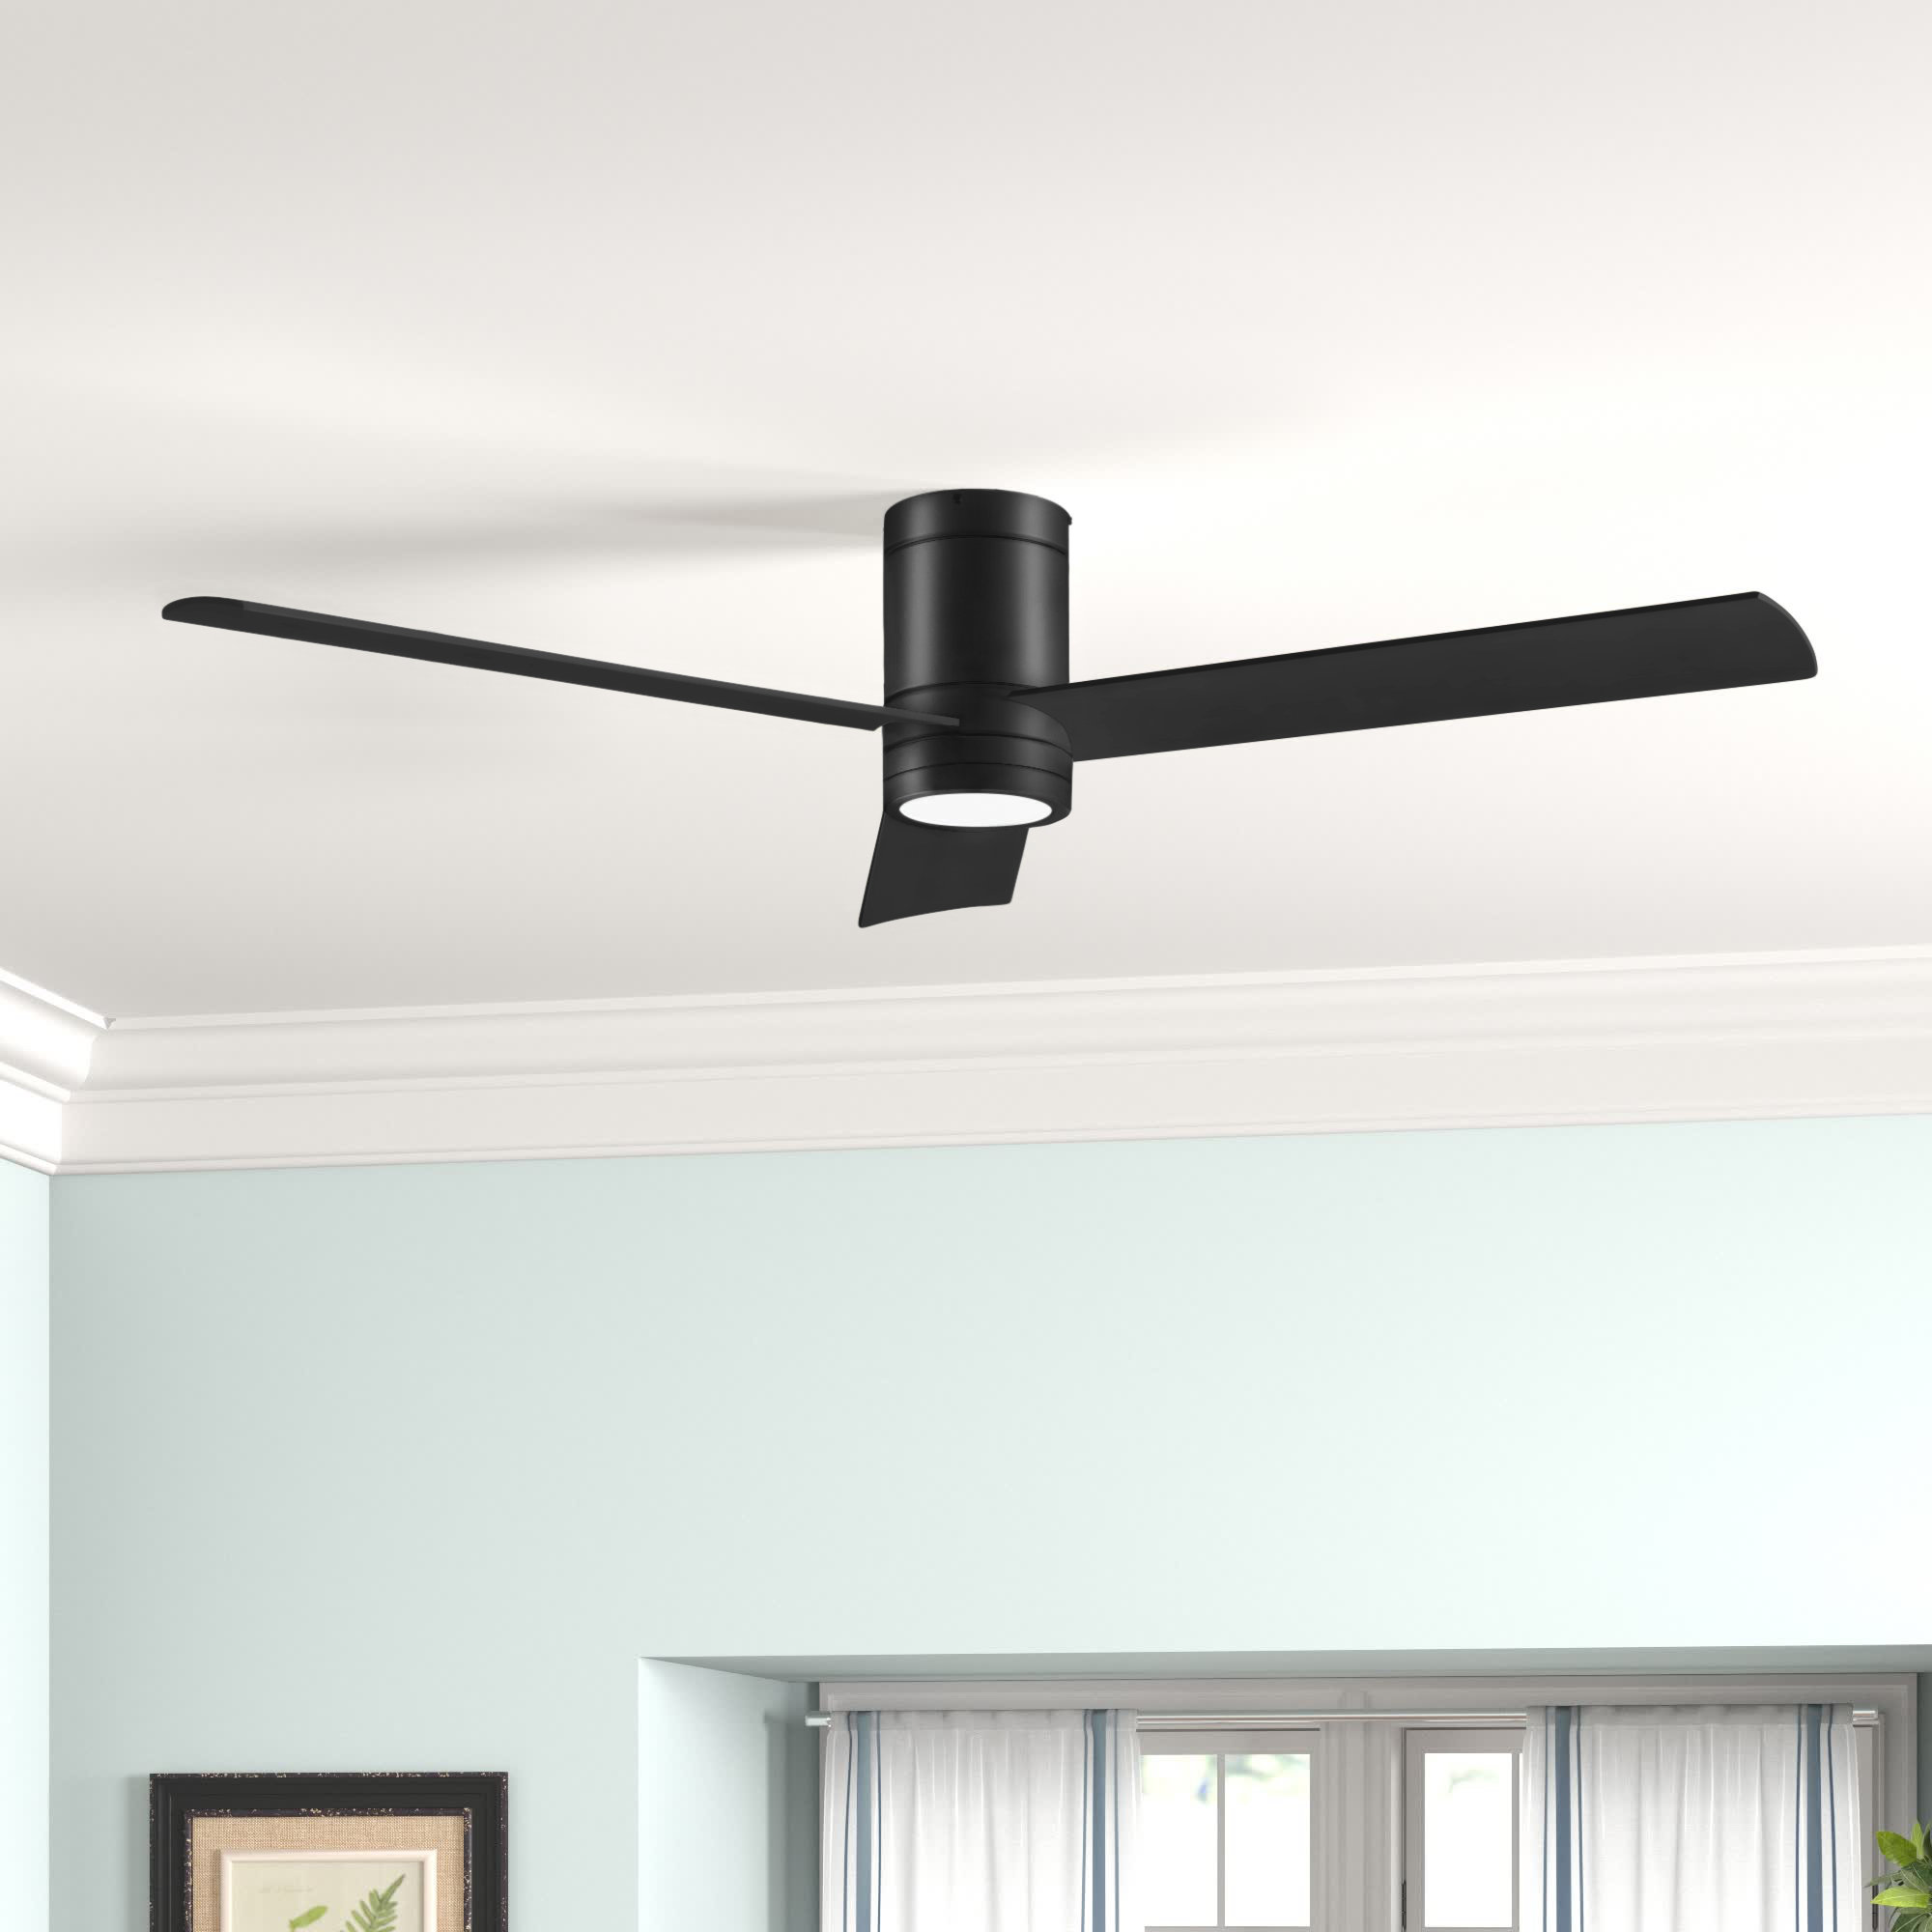 52 Gun Metal Details about   Prominence Home 51465-01 Espy Ceiling Fan 